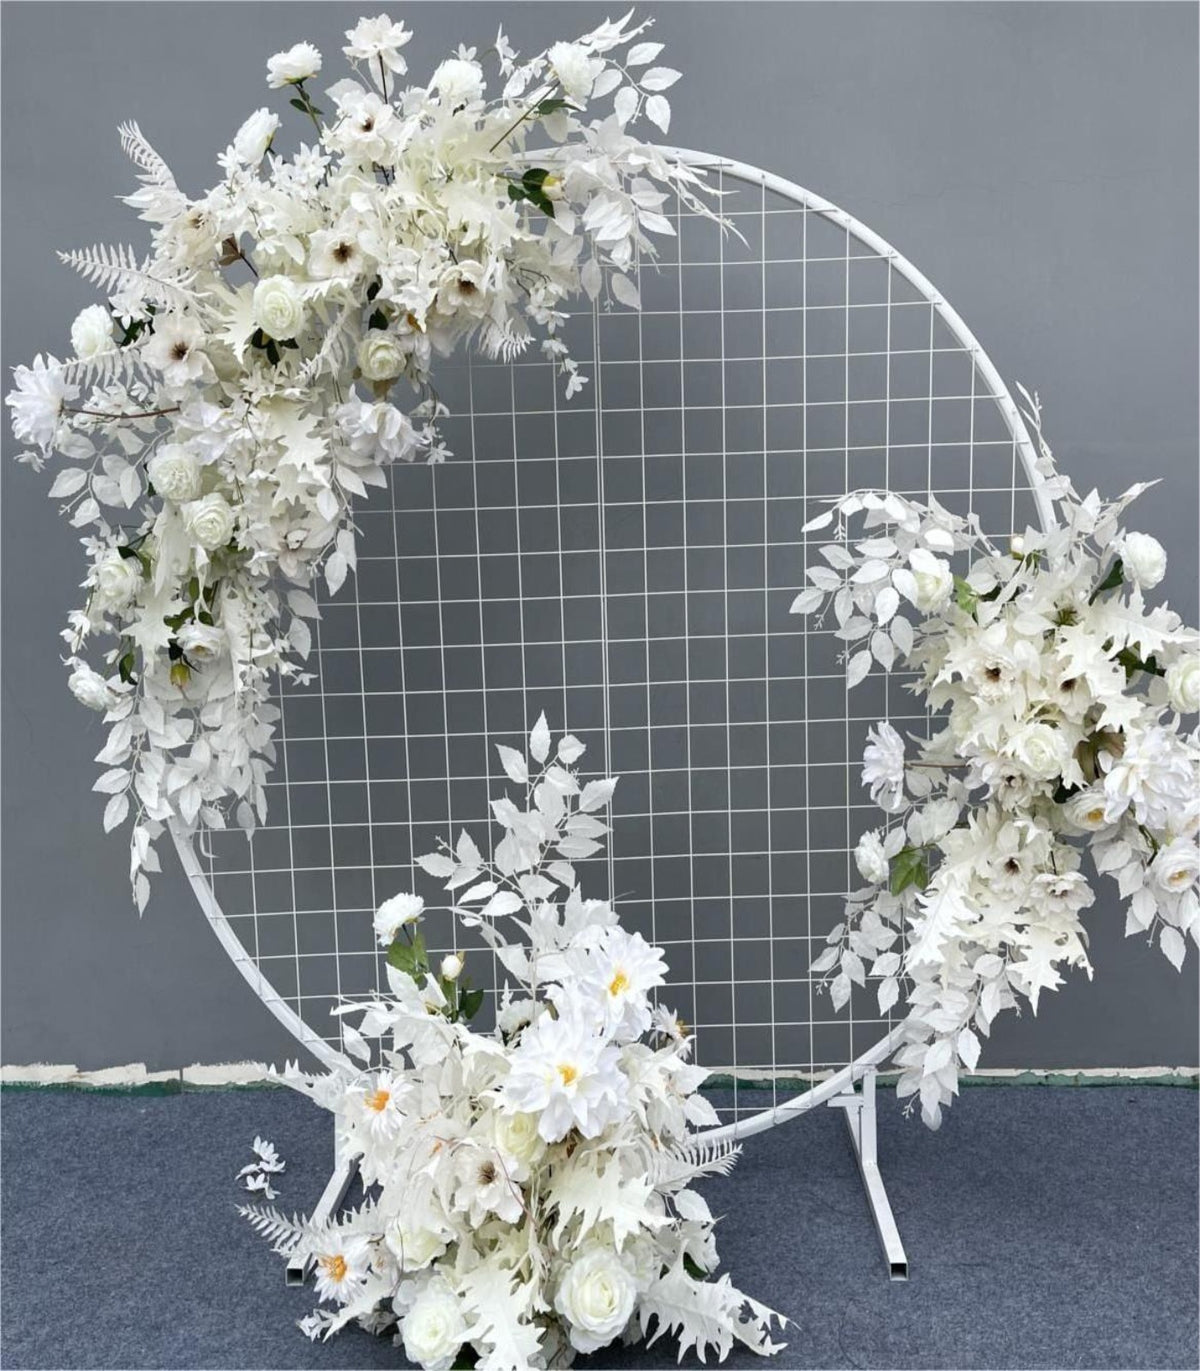 White Green Bendable Artificial Flower Wedding Party Birthday Backdrop Decor CH9314-11